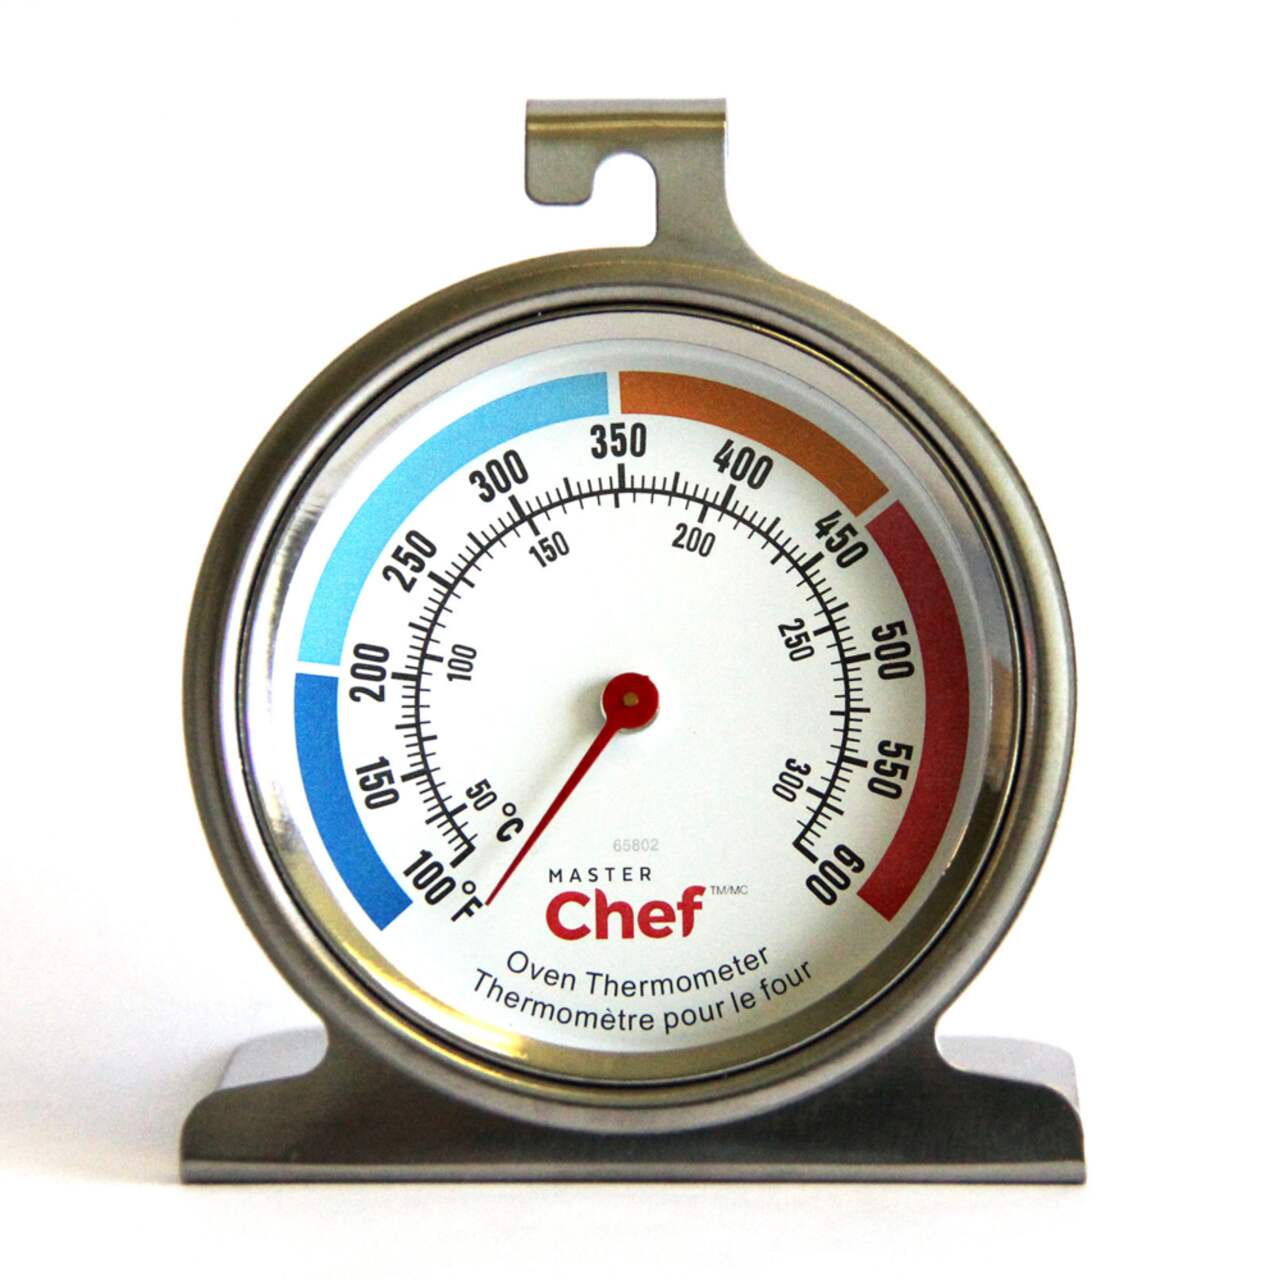 https://media-www.canadiantire.ca/product/living/kitchen/kitchen-tools-thermometers/0421609/masterchef-stainless-steel-oven-thermometer-0a9a11d2-90da-457d-b05e-efae80ef47c9.png?imdensity=1&imwidth=640&impolicy=mZoom